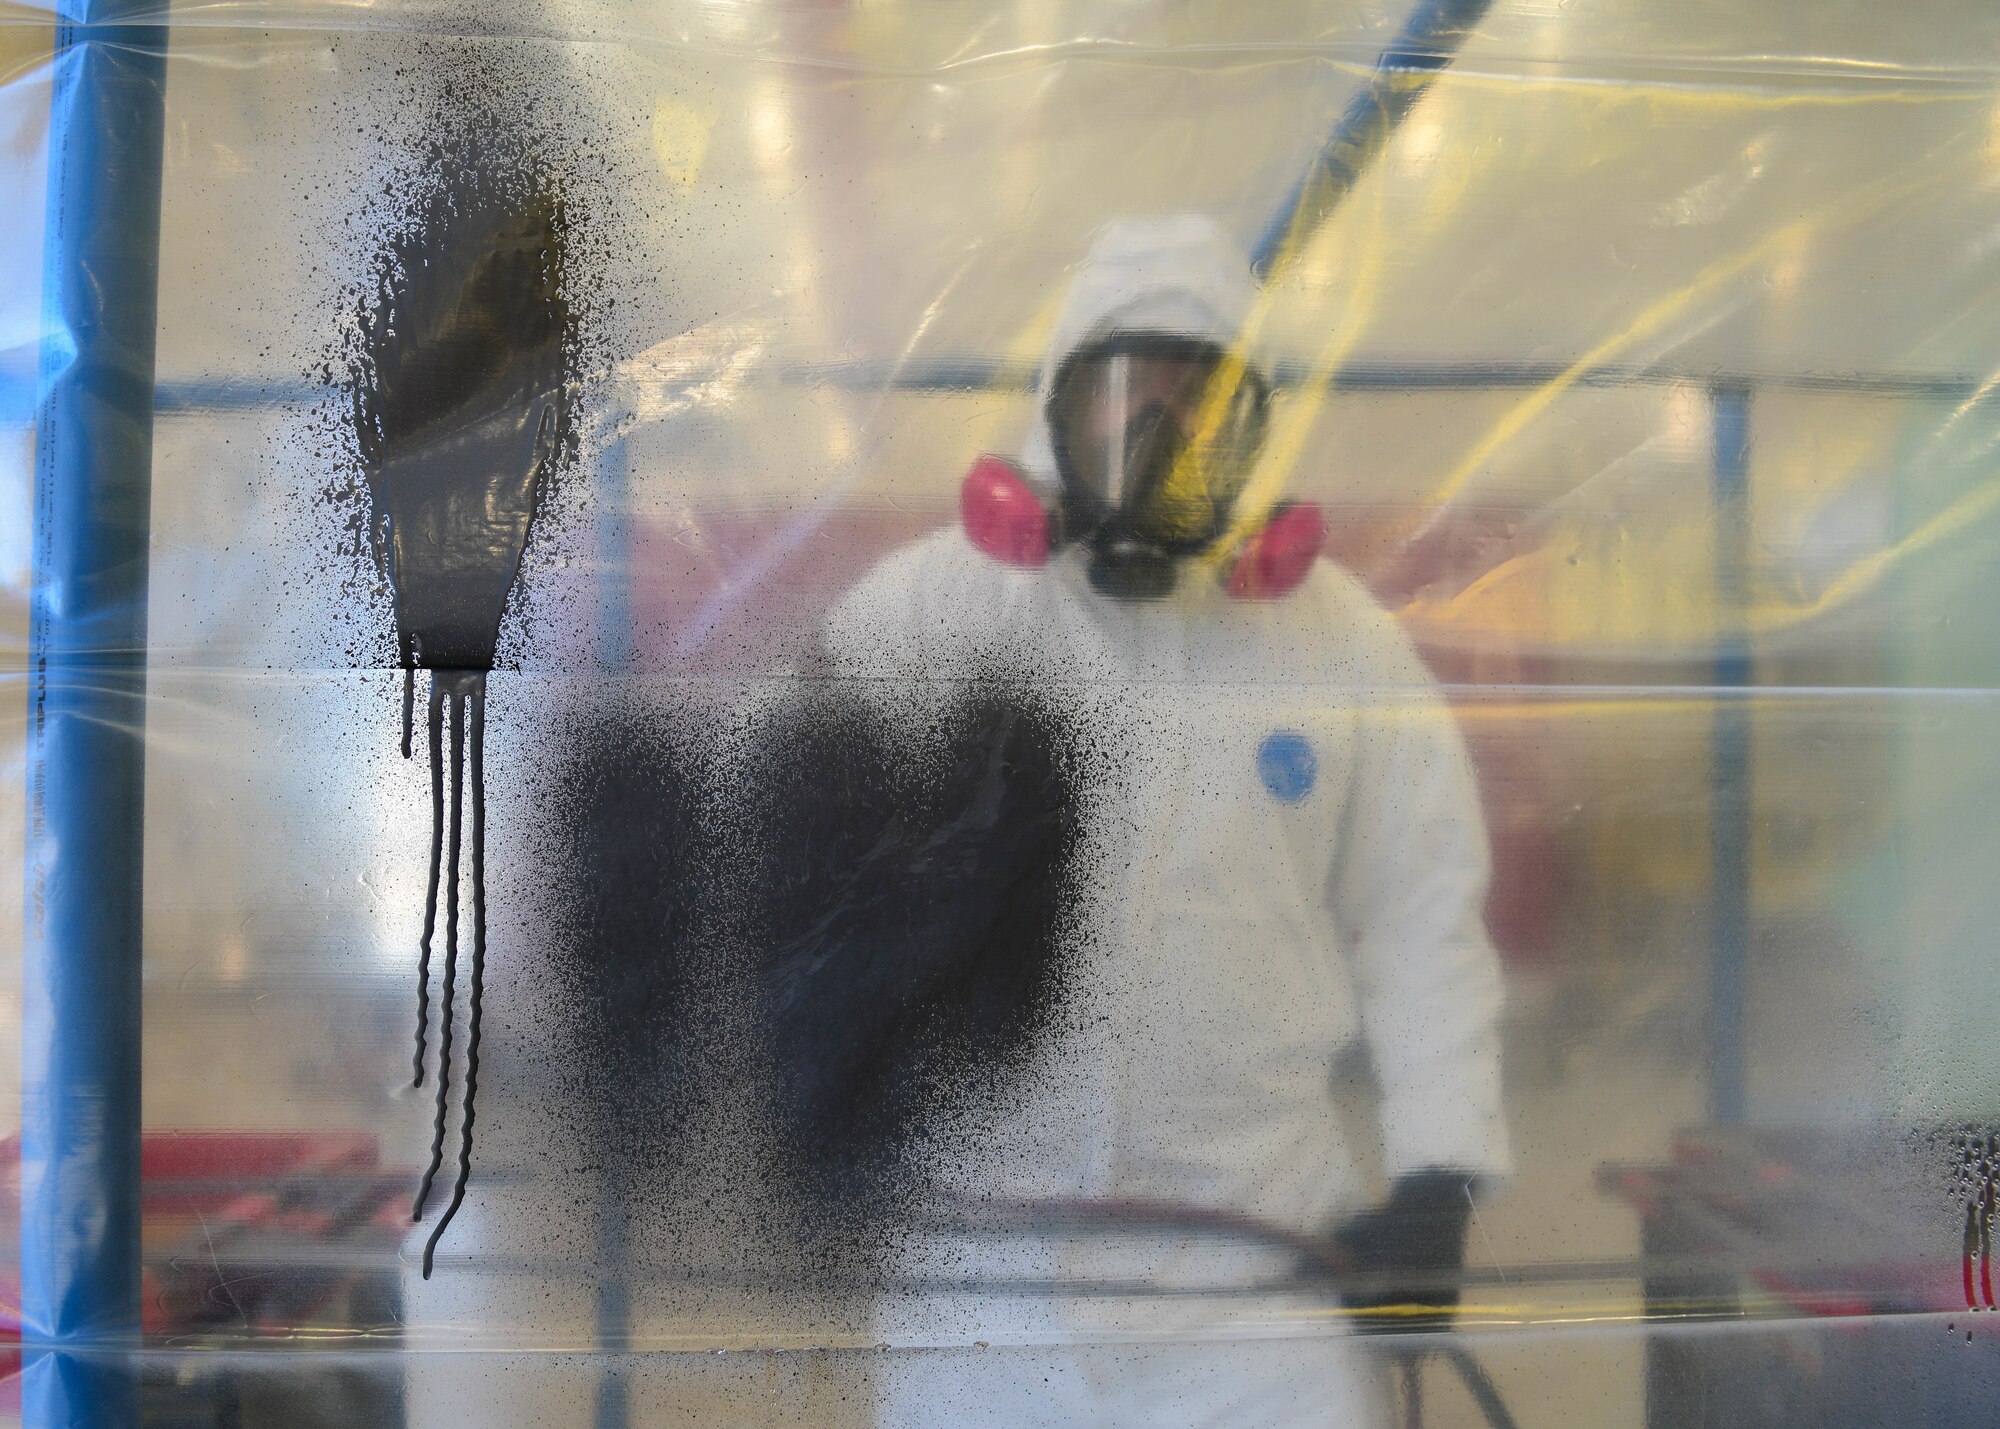 U.S. Staff Sgt. Cameron Keeney, 31st Maintenance Squadron aircraft structural maintenance craftsman, tests the paint on the wall of the Tent N Vent at Aviano Air Base, Italy. The Tent N Vent cuts down production time and allows the aircraft part to be painted at Aviano instead of the whole aircraft being transported to SABCA, a Belgian aerospace company. (U.S. Air Force photo by Senior Airman Brooke Moeder)